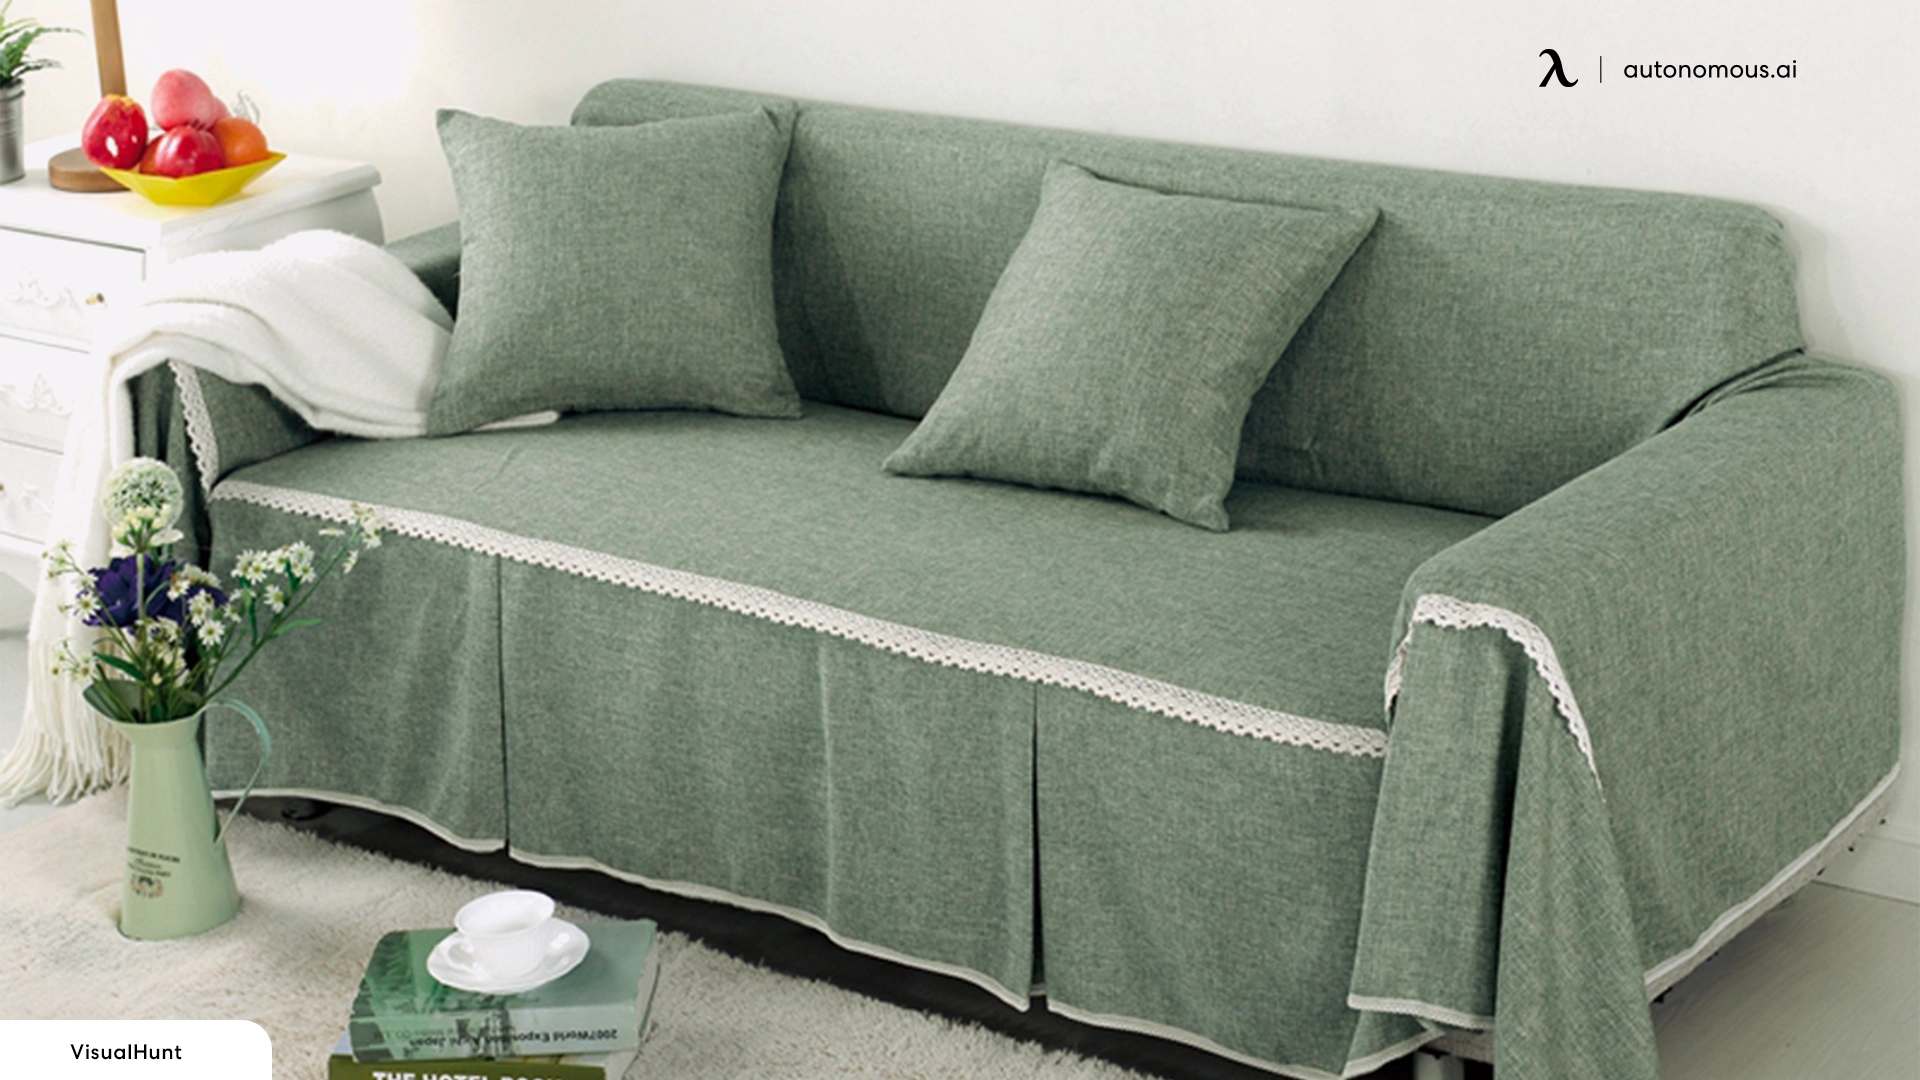 Use Furniture Covers - furniture protection from cats